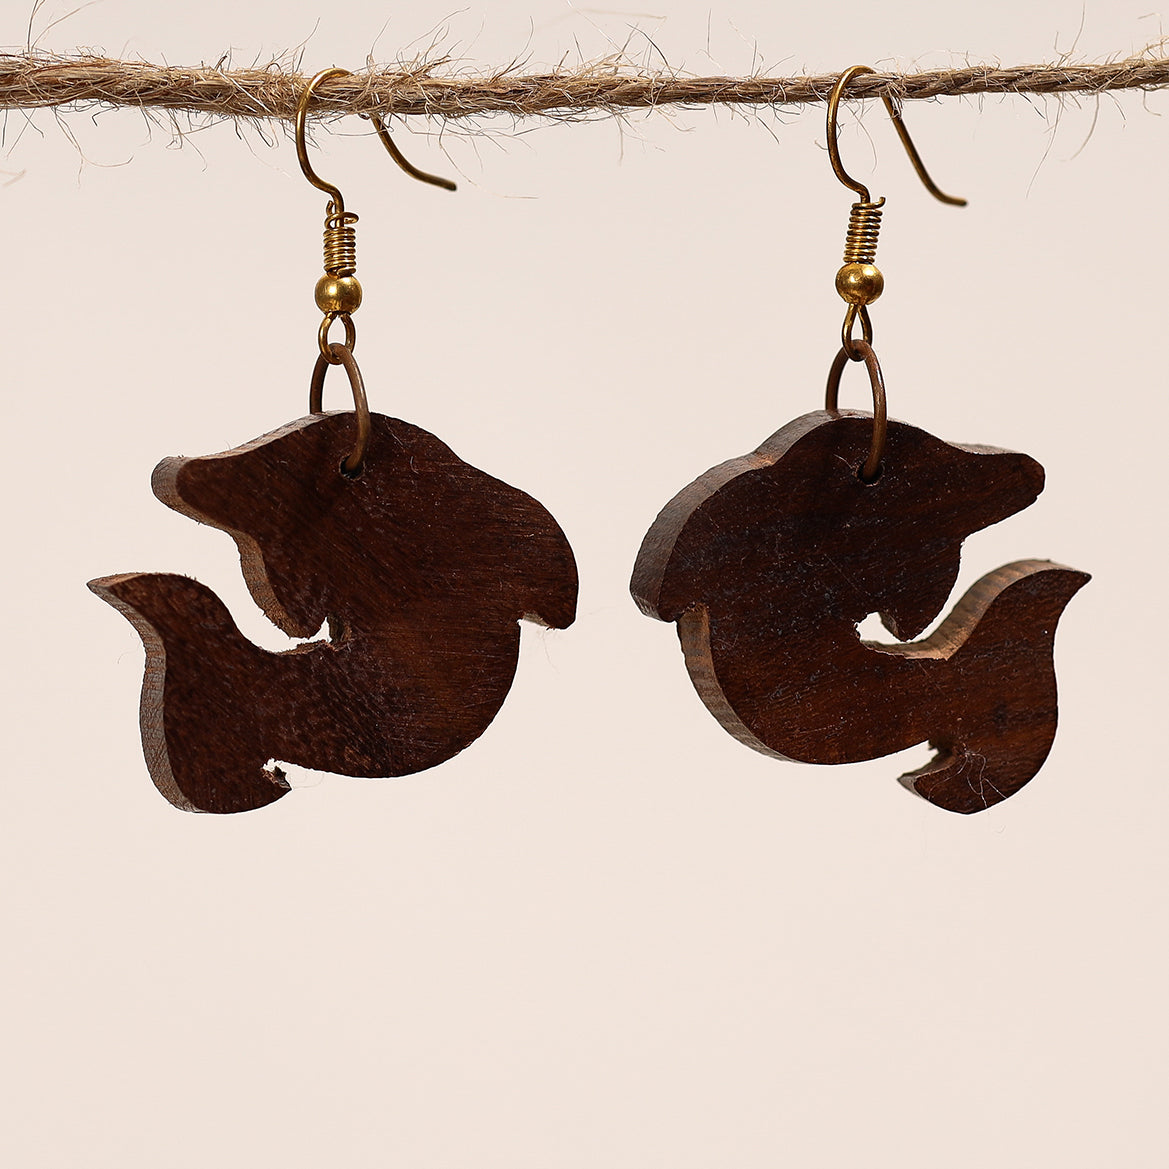 Buy The Magnificent Horse Earrings by Crown Republic Hand Carved Wooden  Earring Jewelry Unique and Stylish Handmade Earrings Online in India - Etsy